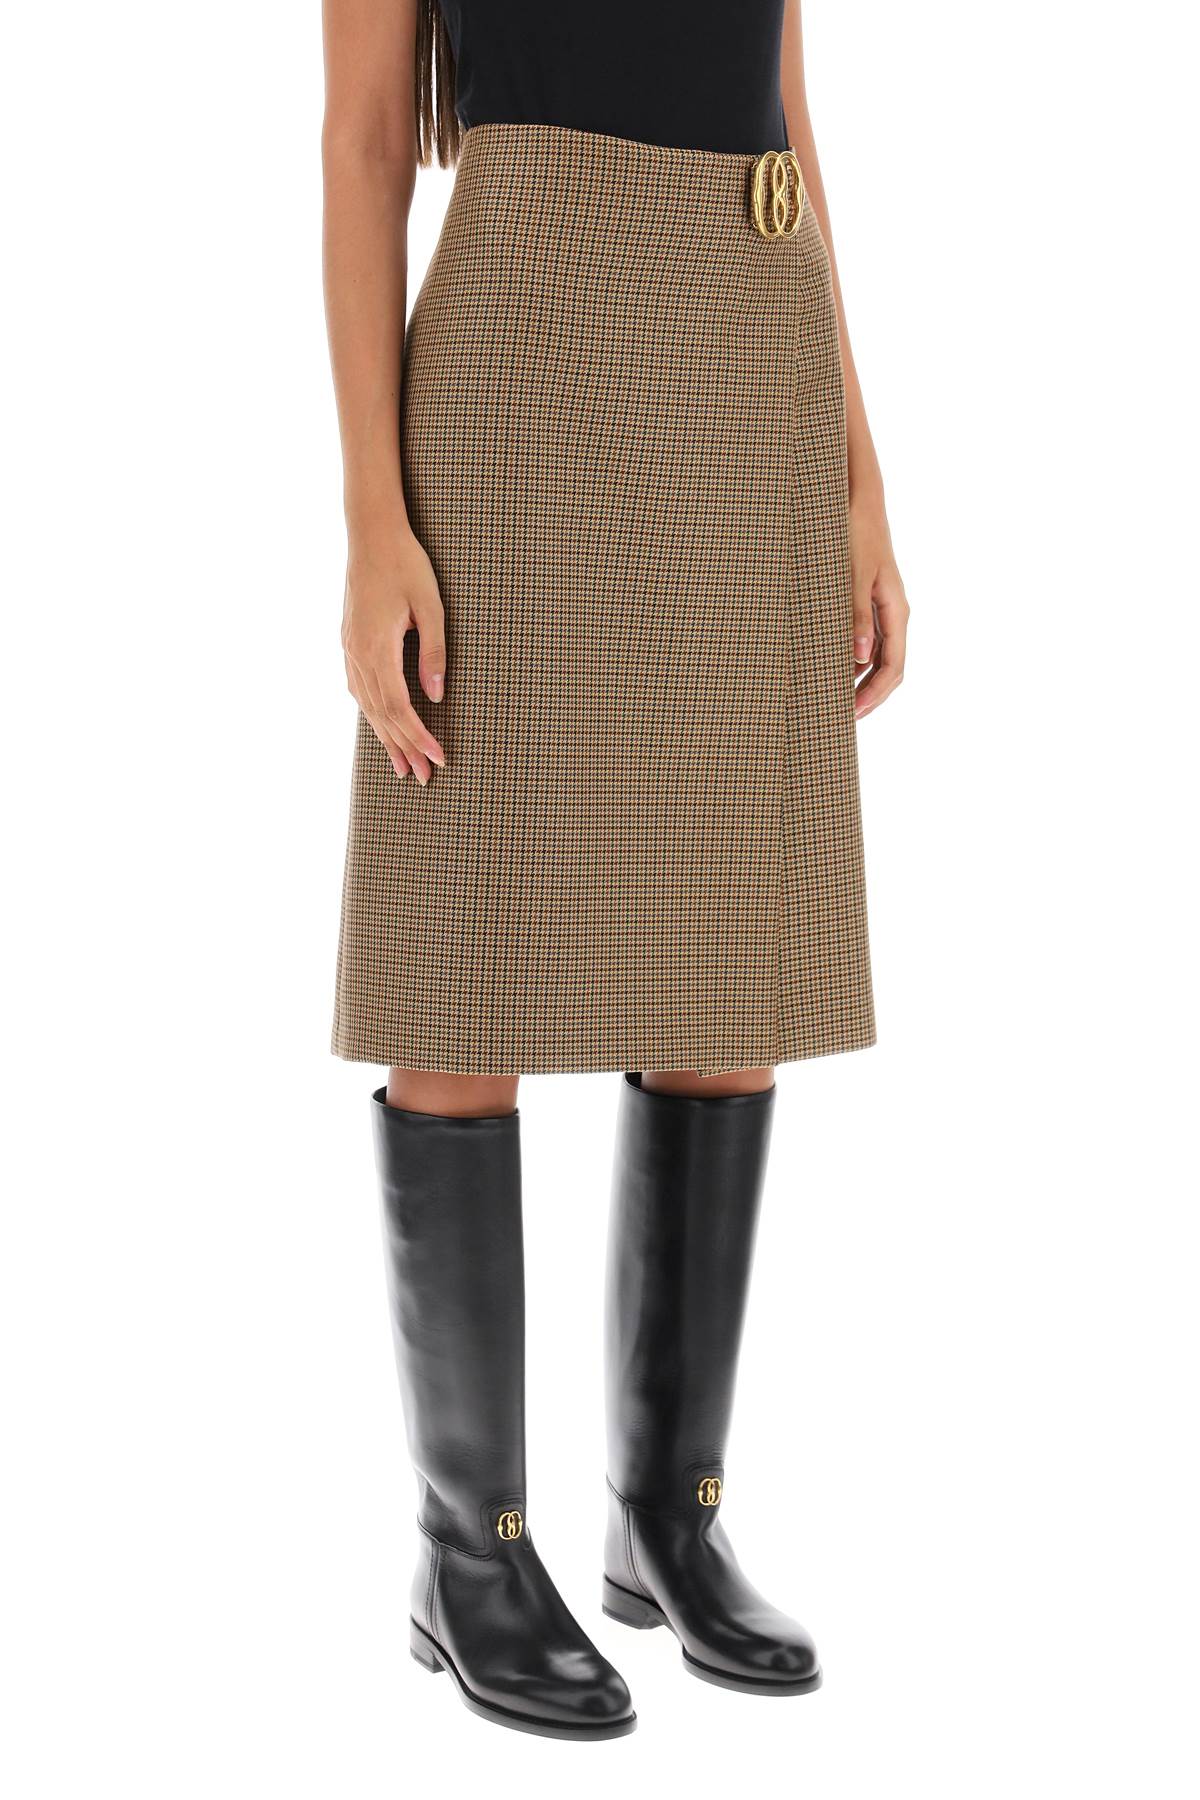 Bally houndstooth a-line skirt with emblem buckle-1